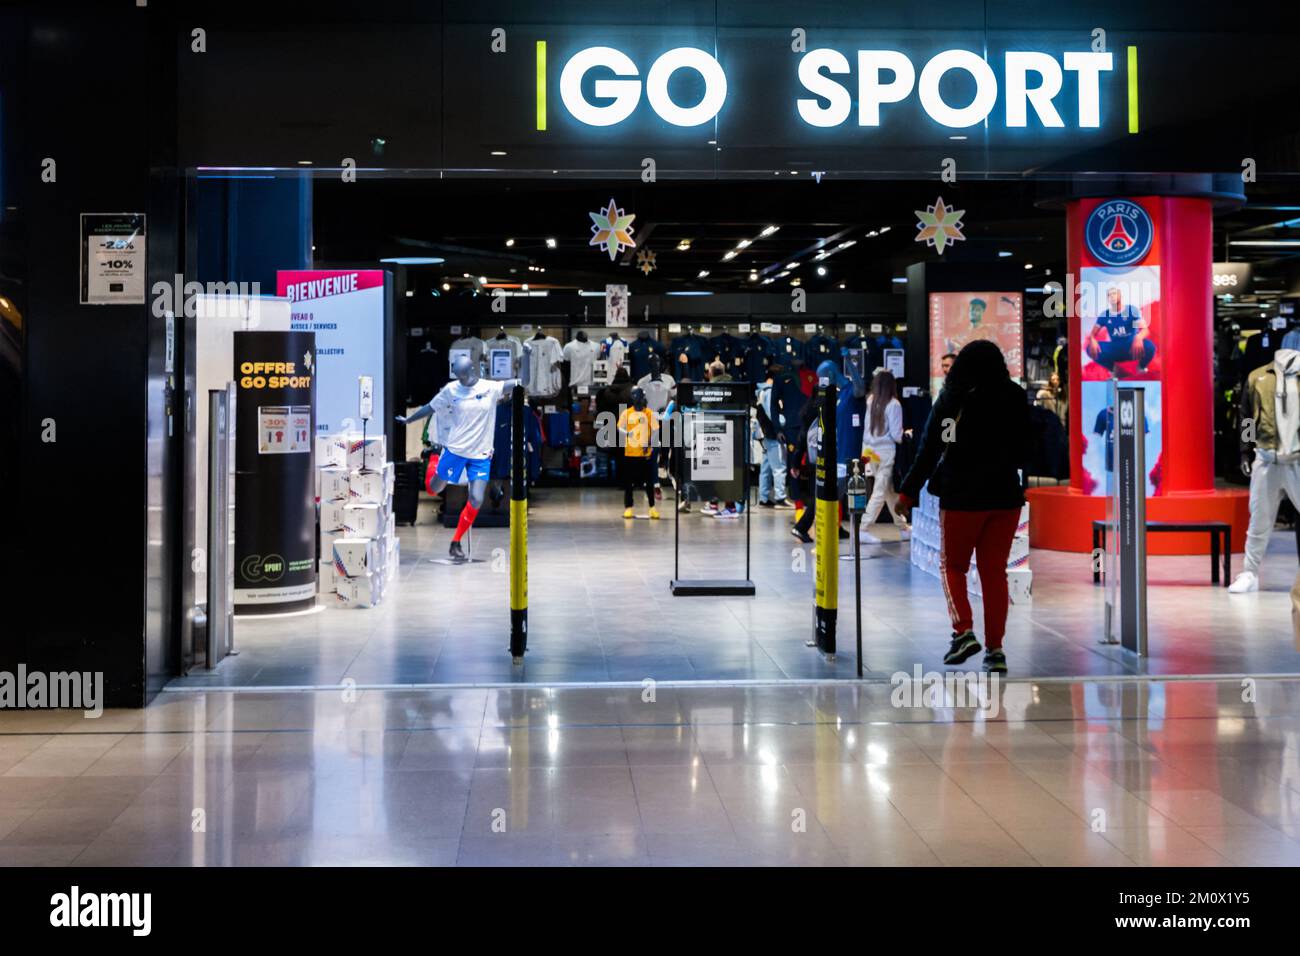 GO SPORT store at La Defense in Paris, France on December 8, 2022. The  ready-to-wear brand Celio buys the Camaieu brand for 1.8 million euros at  auction. The French brand Camaieu was